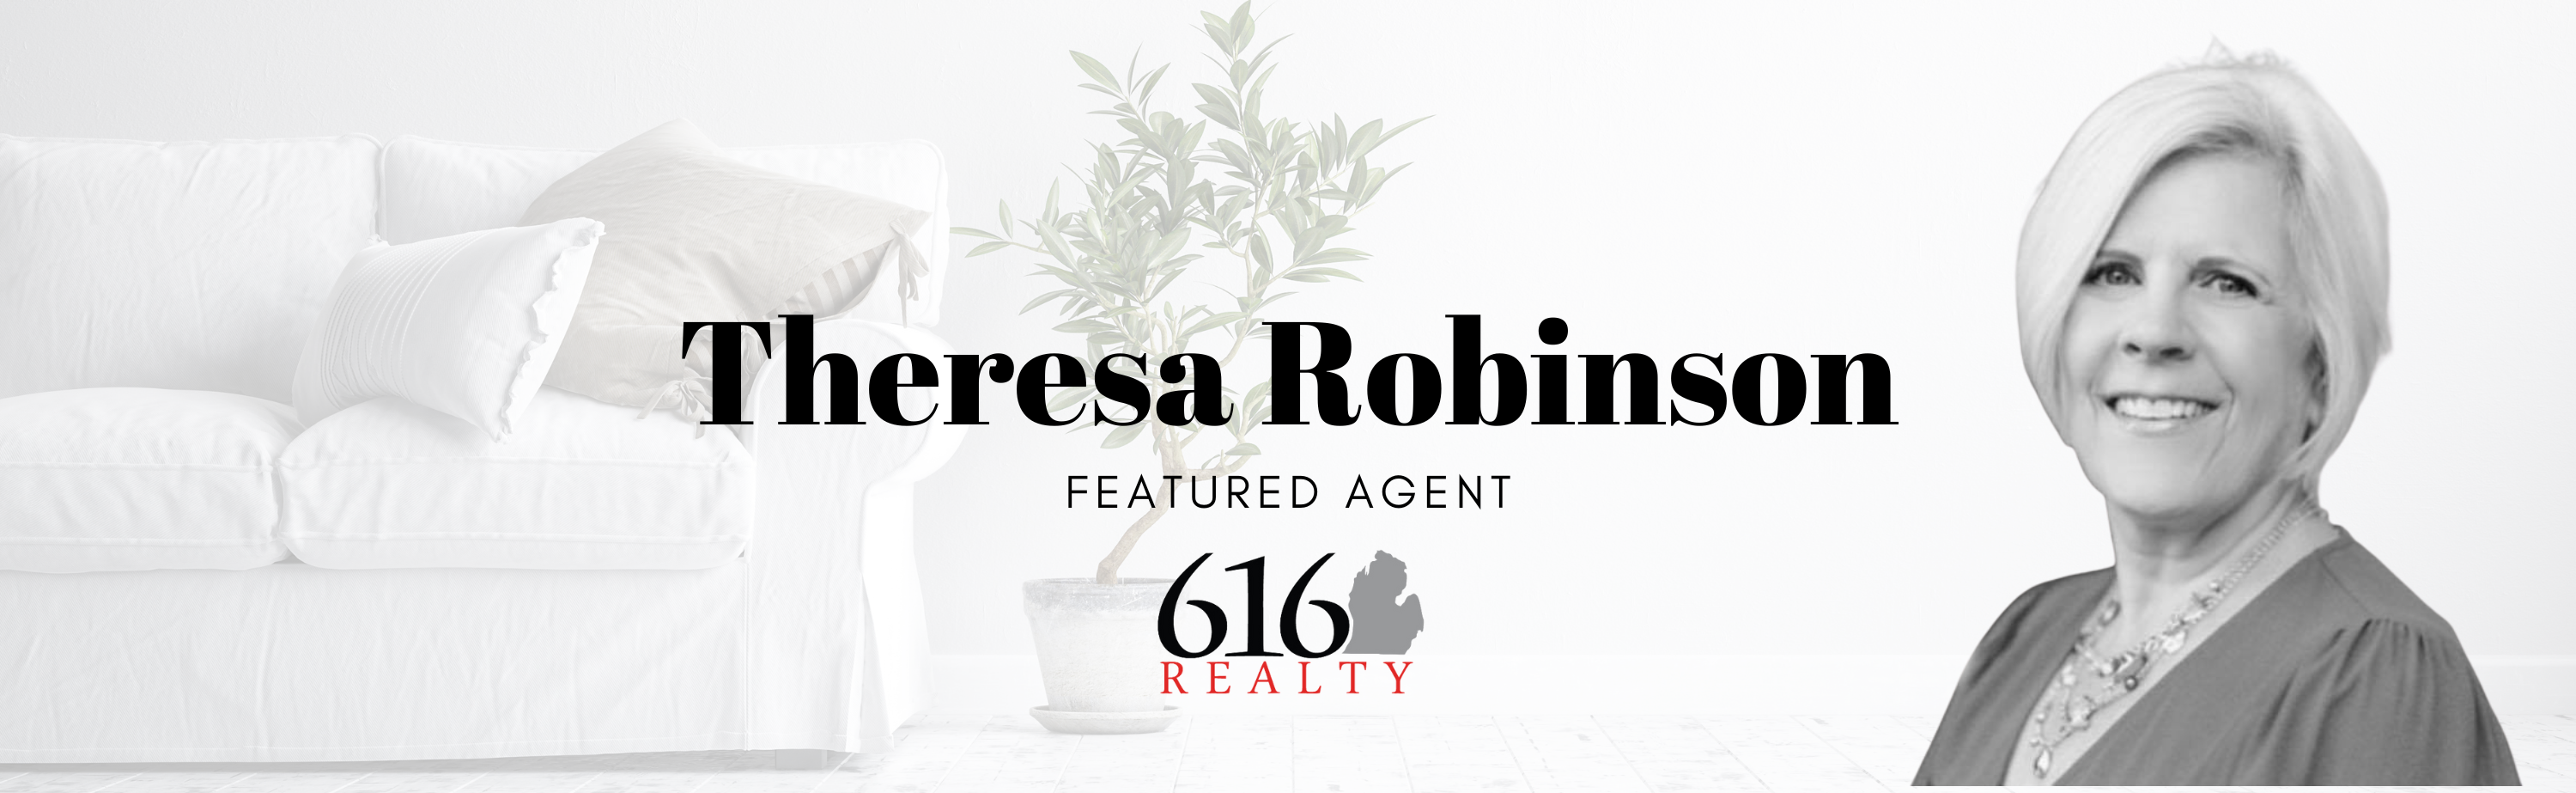 Theresa Robinson - Featured Agent